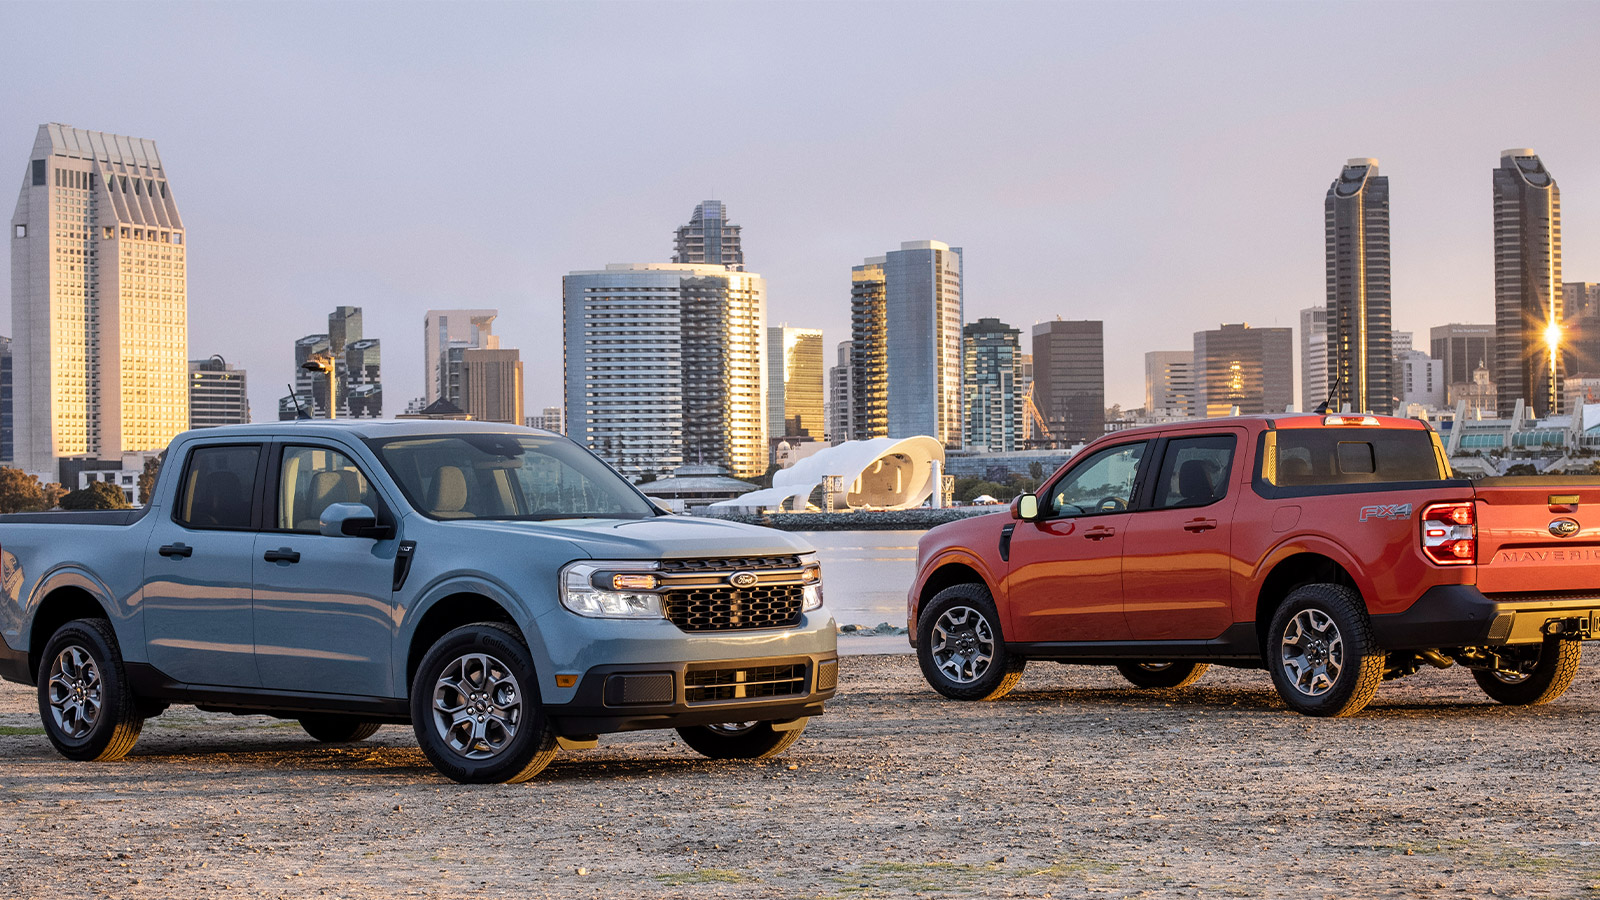 All-New 2022 Ford Maverick Offers Hybrid Powertrain, 4,000-lb Towing